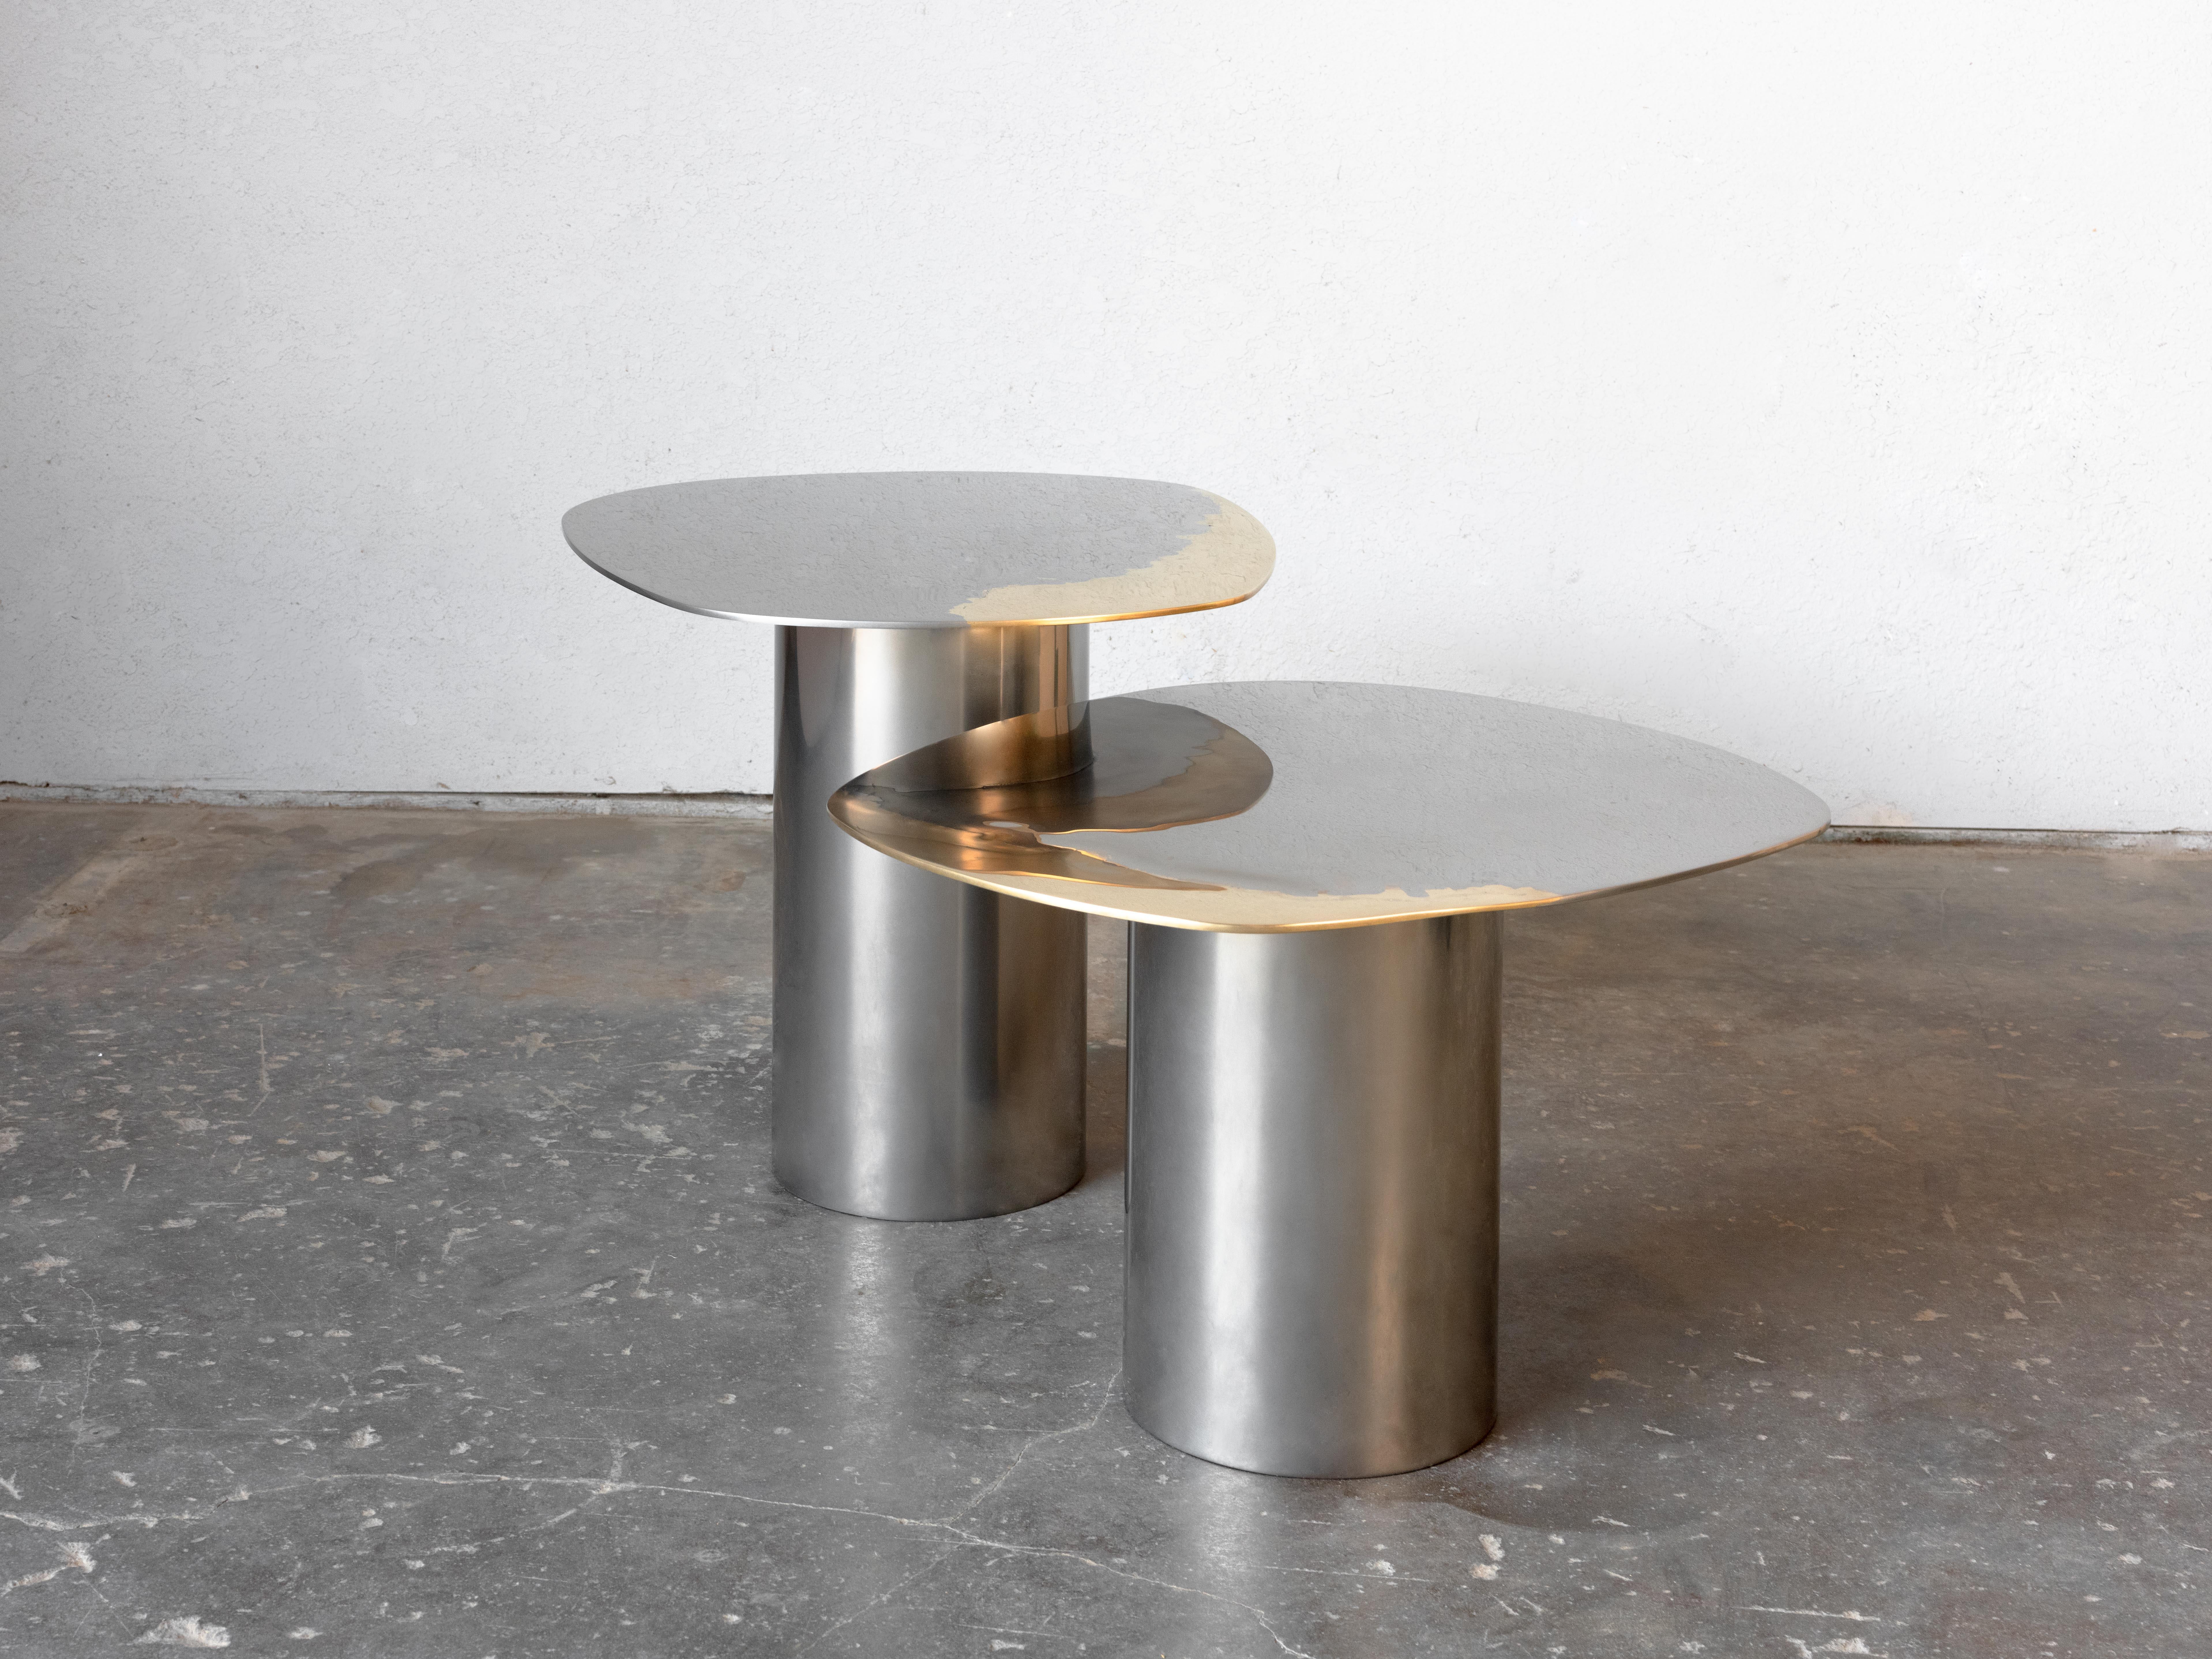 Small Custom Polished Bimetal Brass Stainless Steel Transition Side Tables In New Condition For Sale In Santa Monica, CA